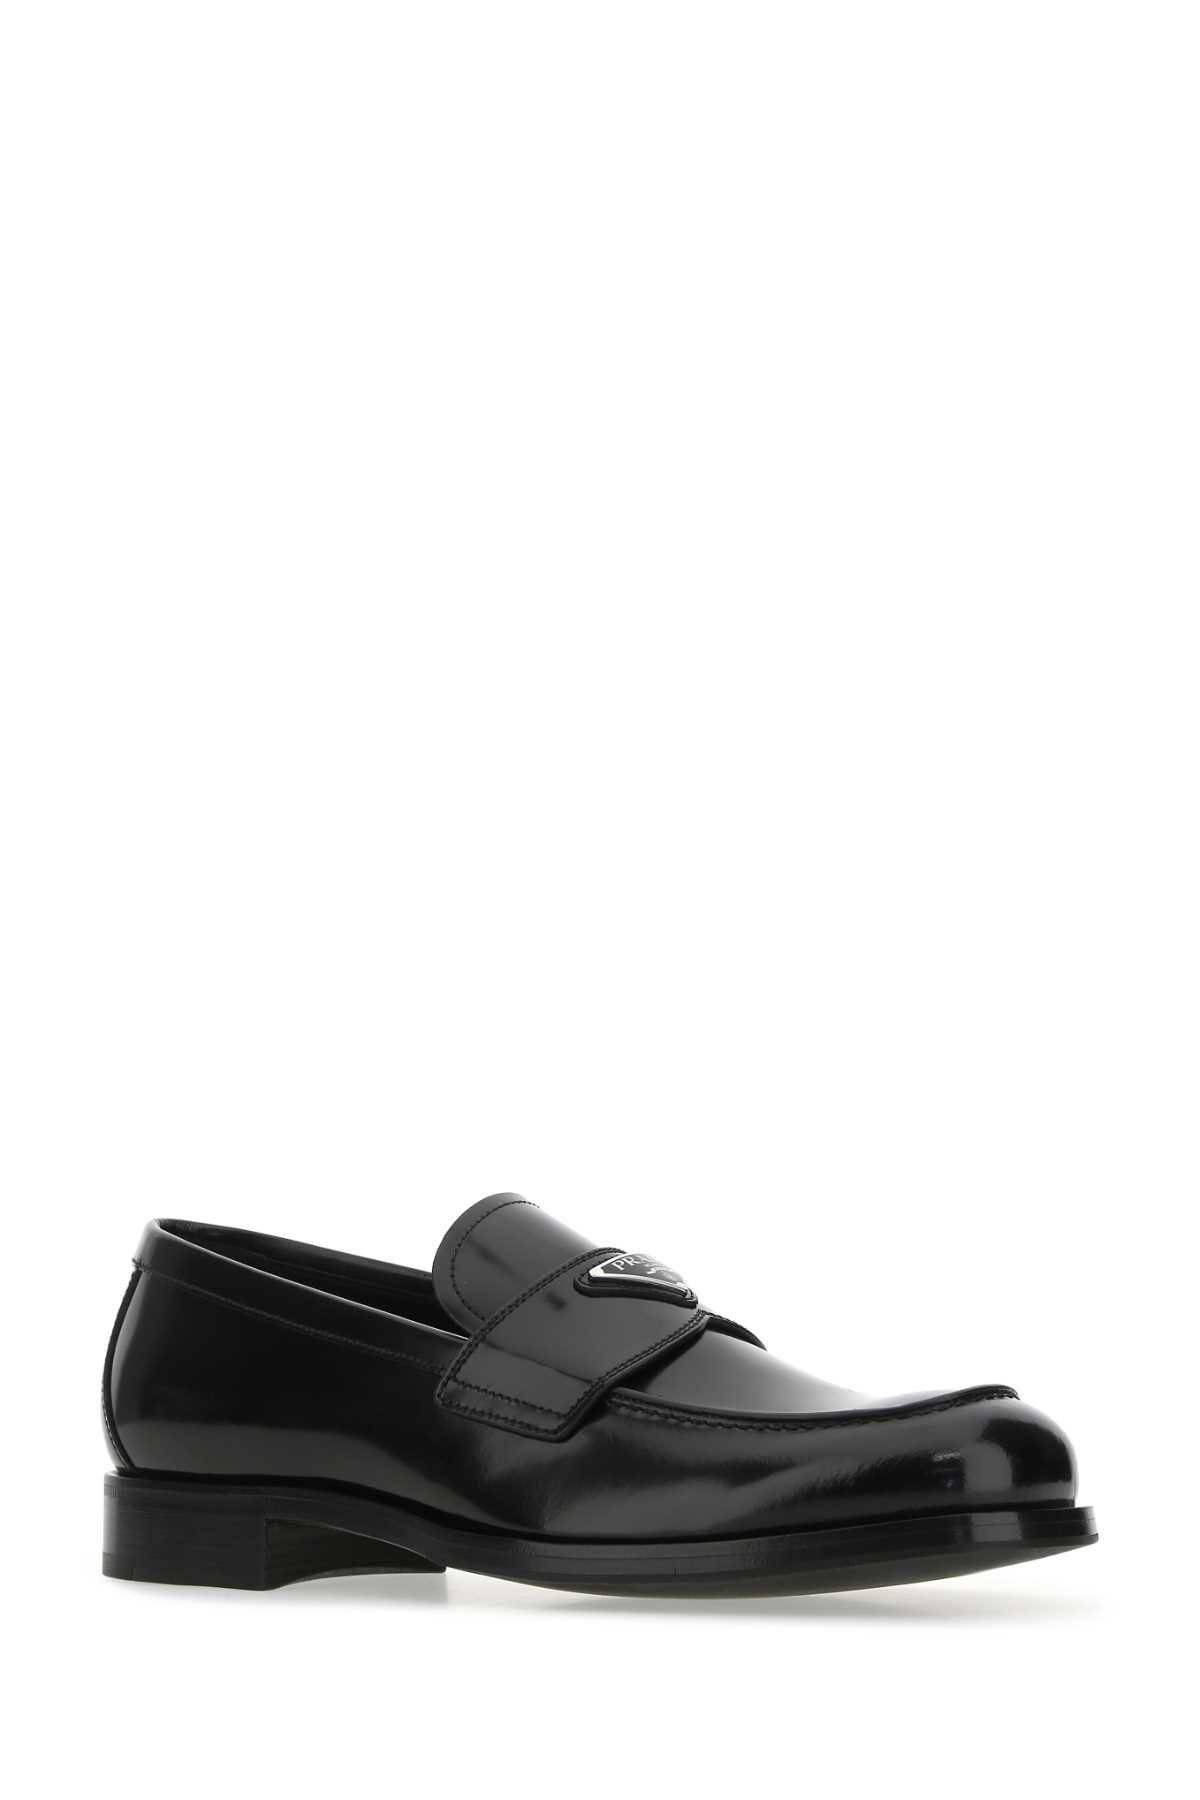 Prada Black Leather Loafers In F0002